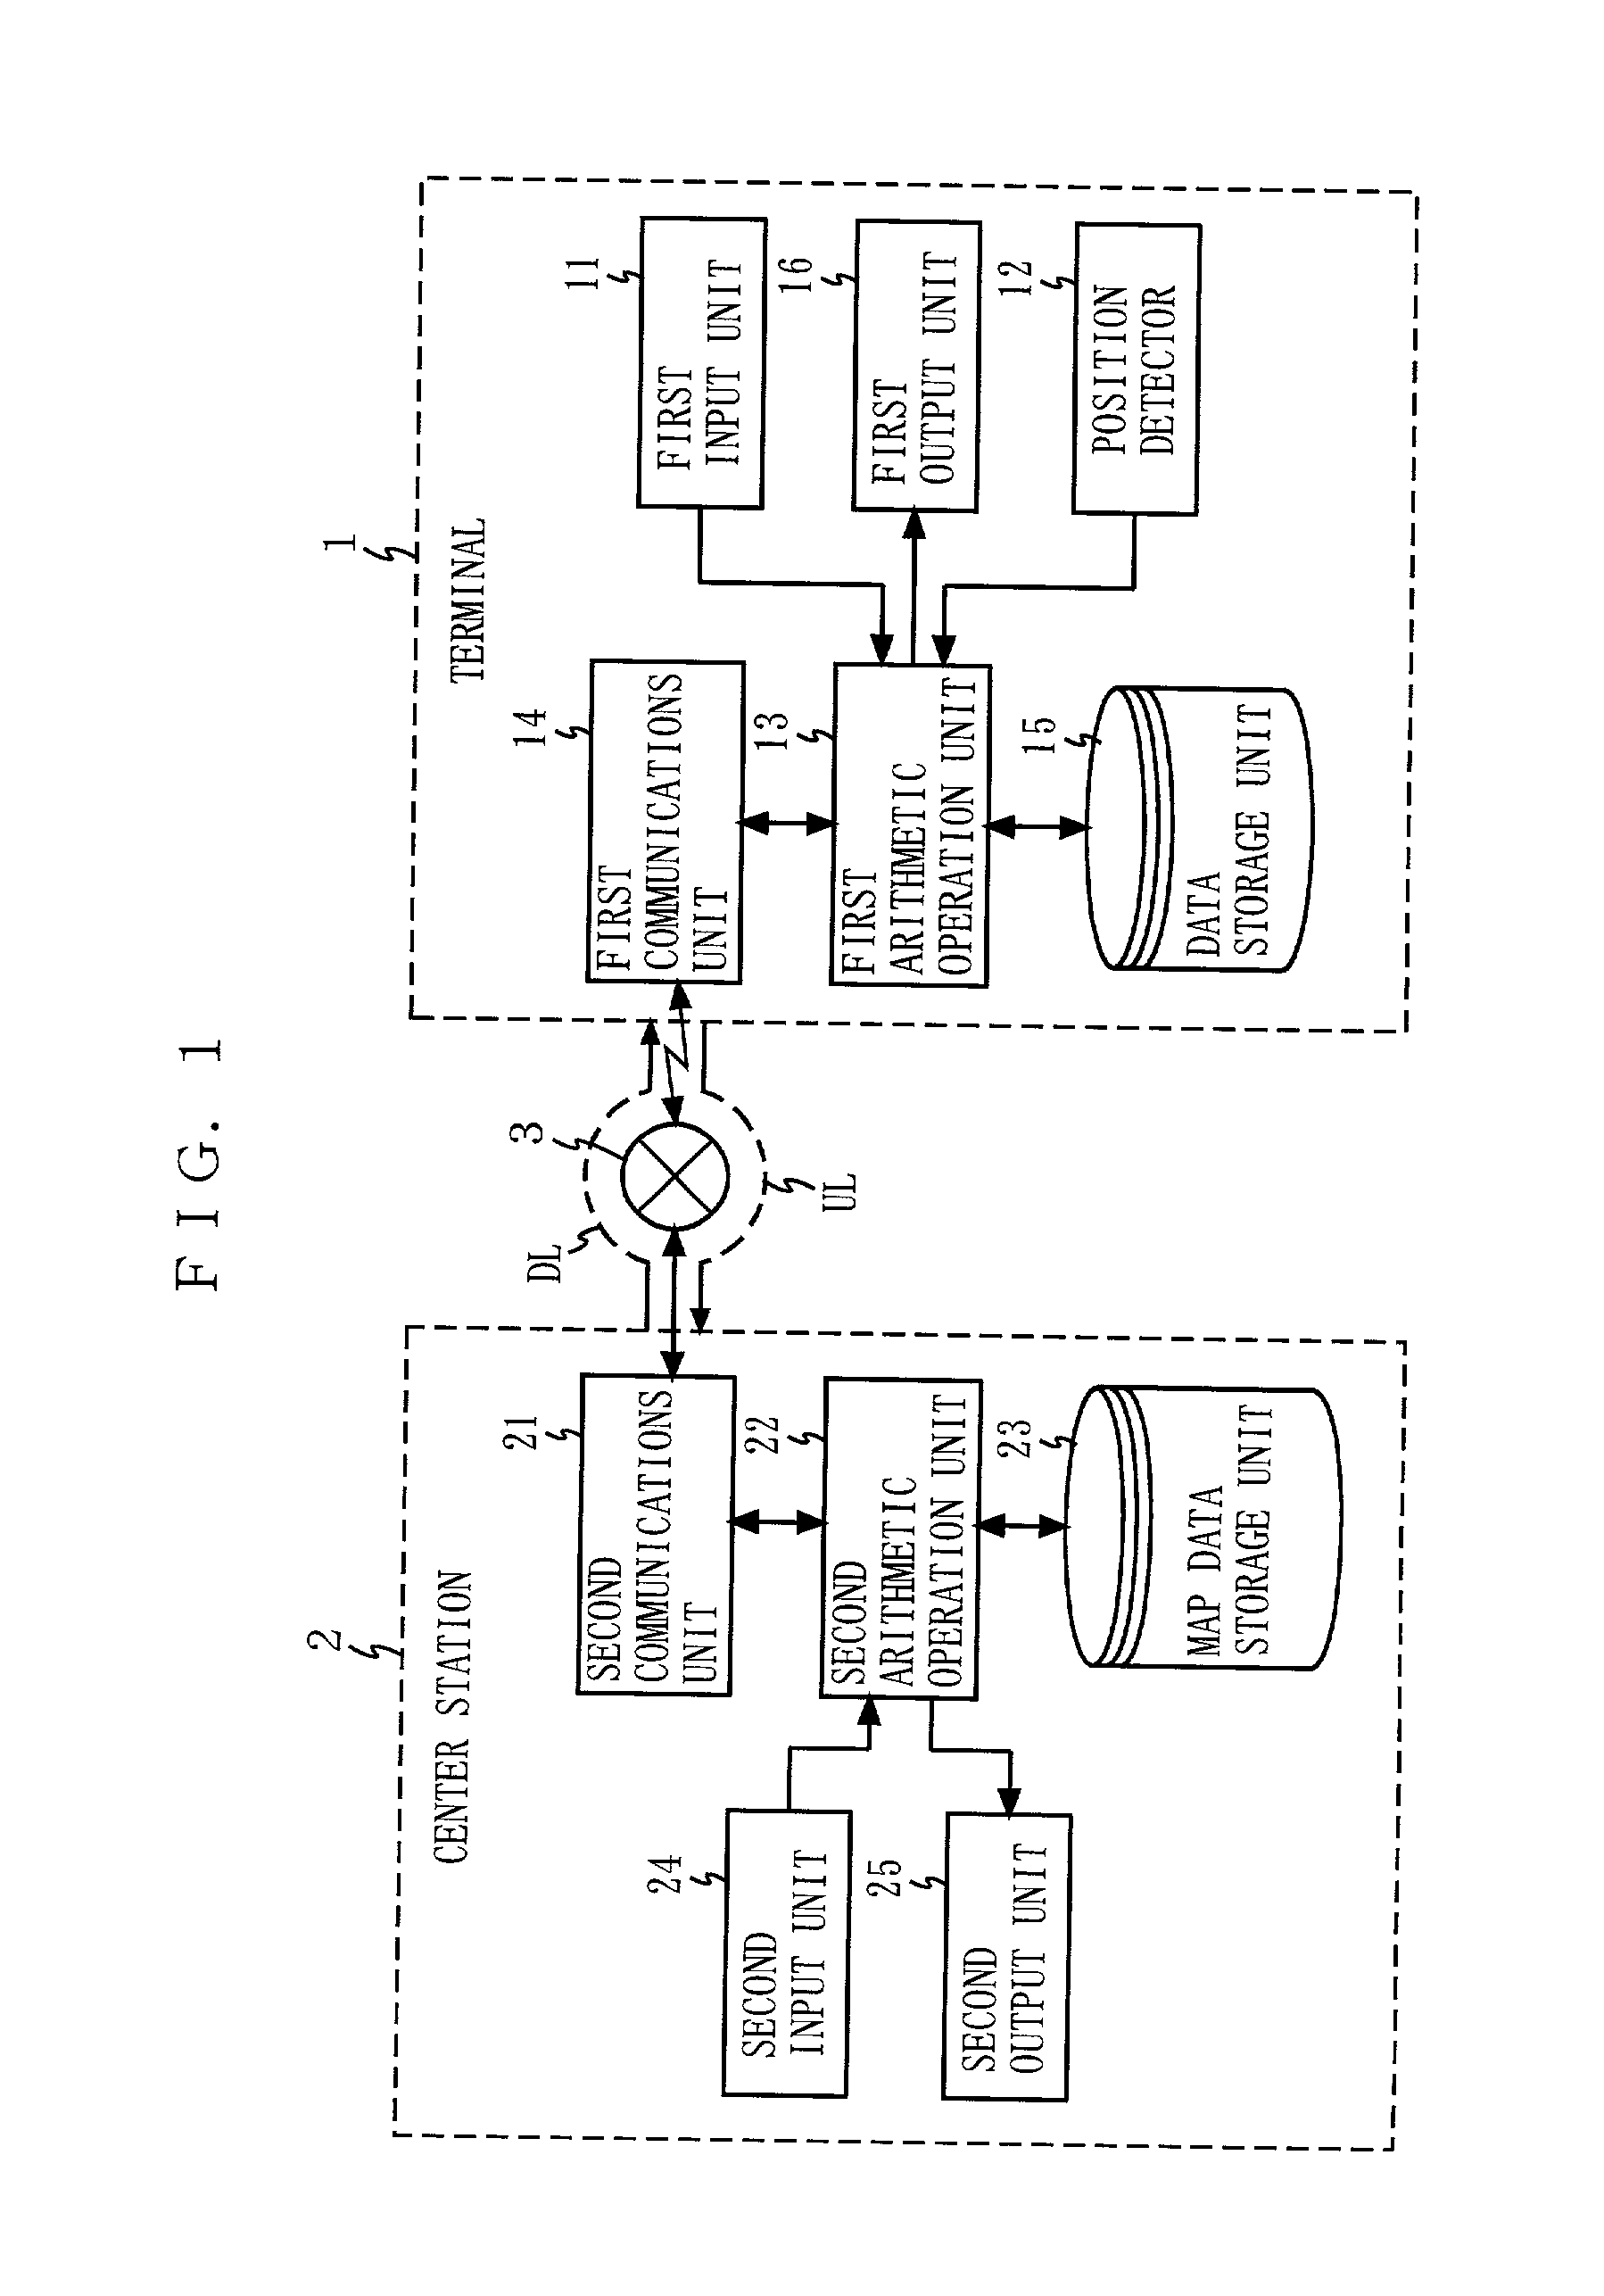 Route guide information distributing system